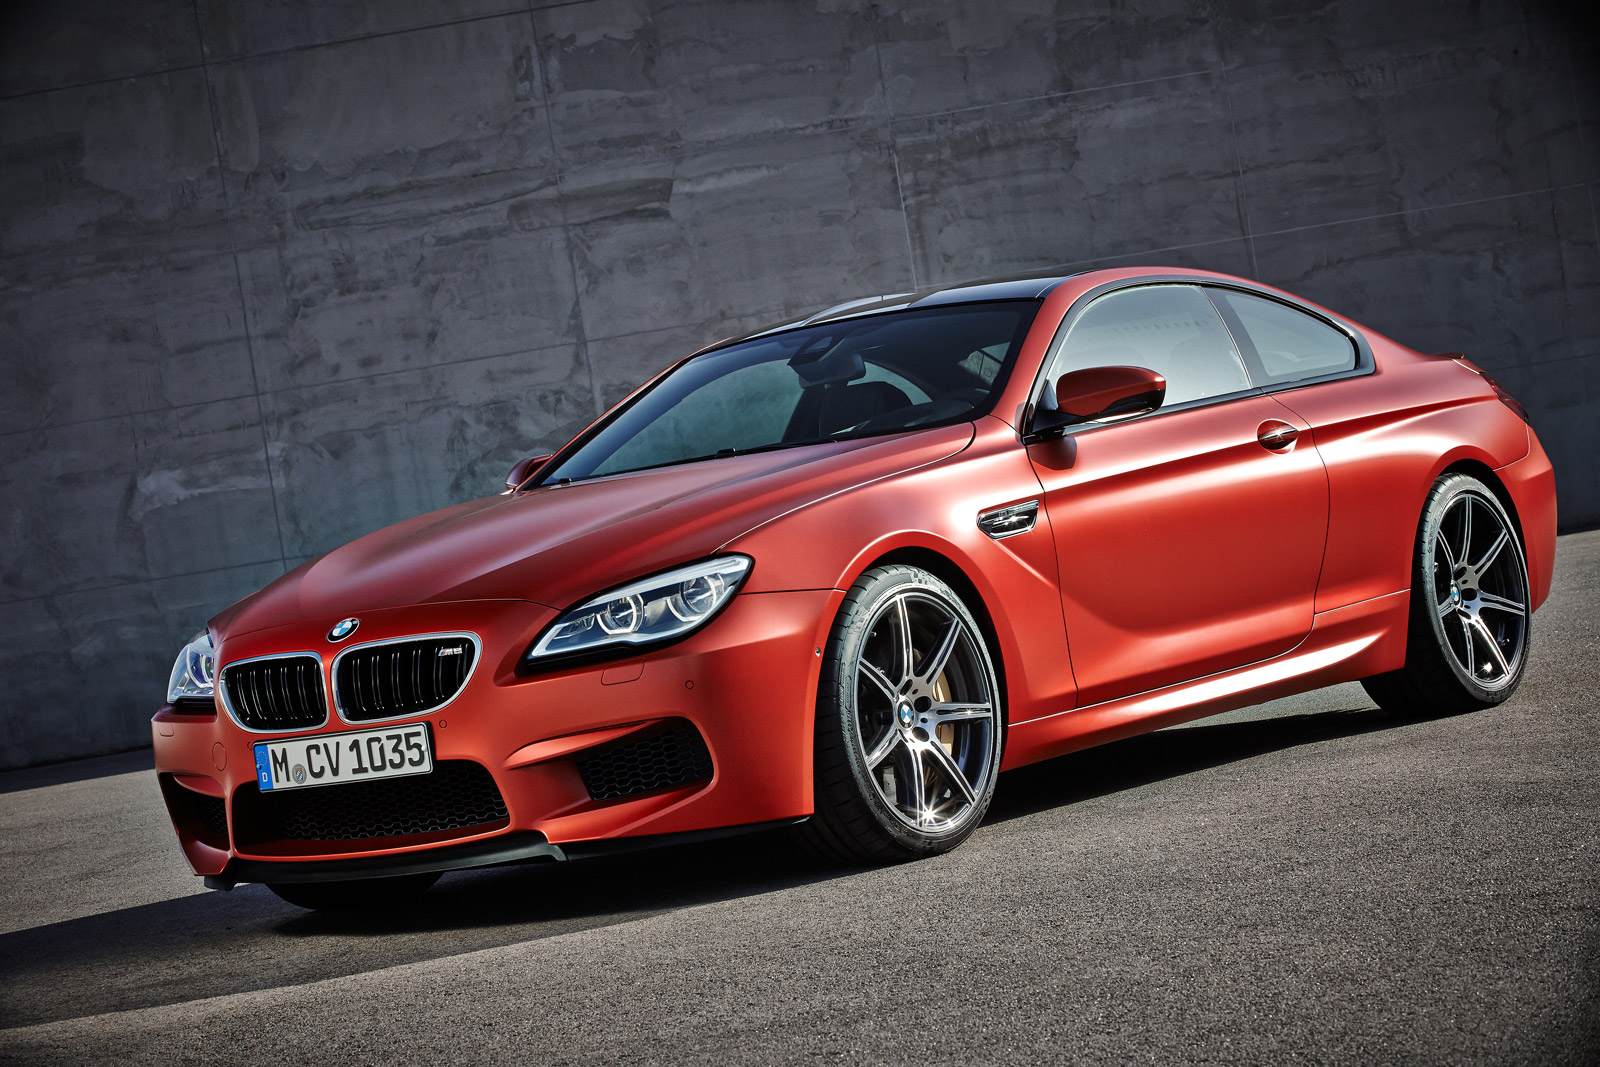 2016 BMW M6 Gets Revised Styling, More Standard Equipment: Video